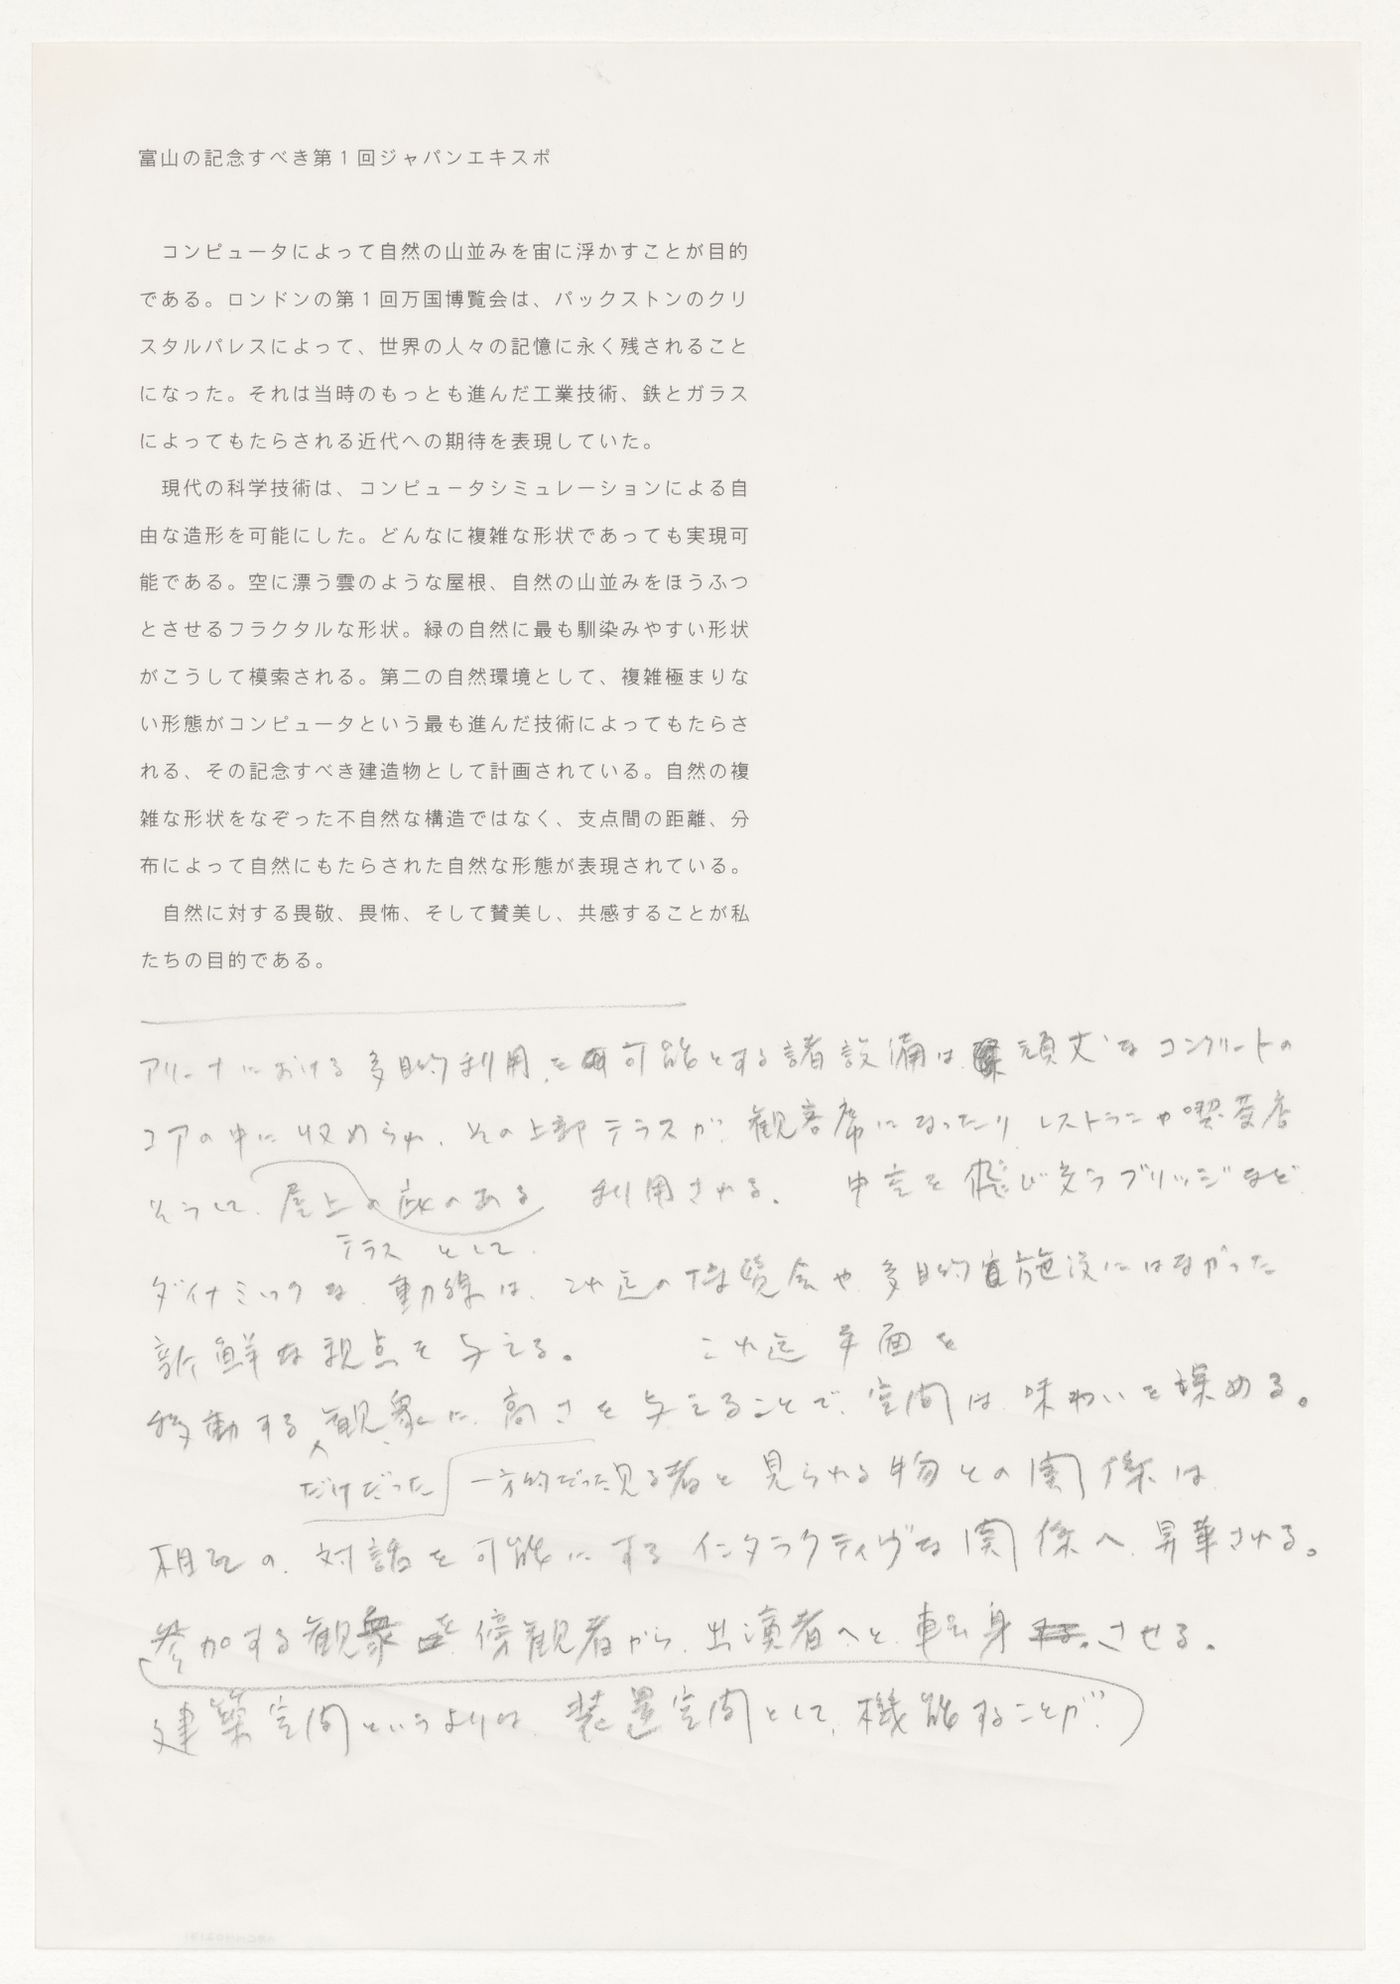 Textual document from the project file "Galaxy Toyama Gymnasium, Imizu, Japan"